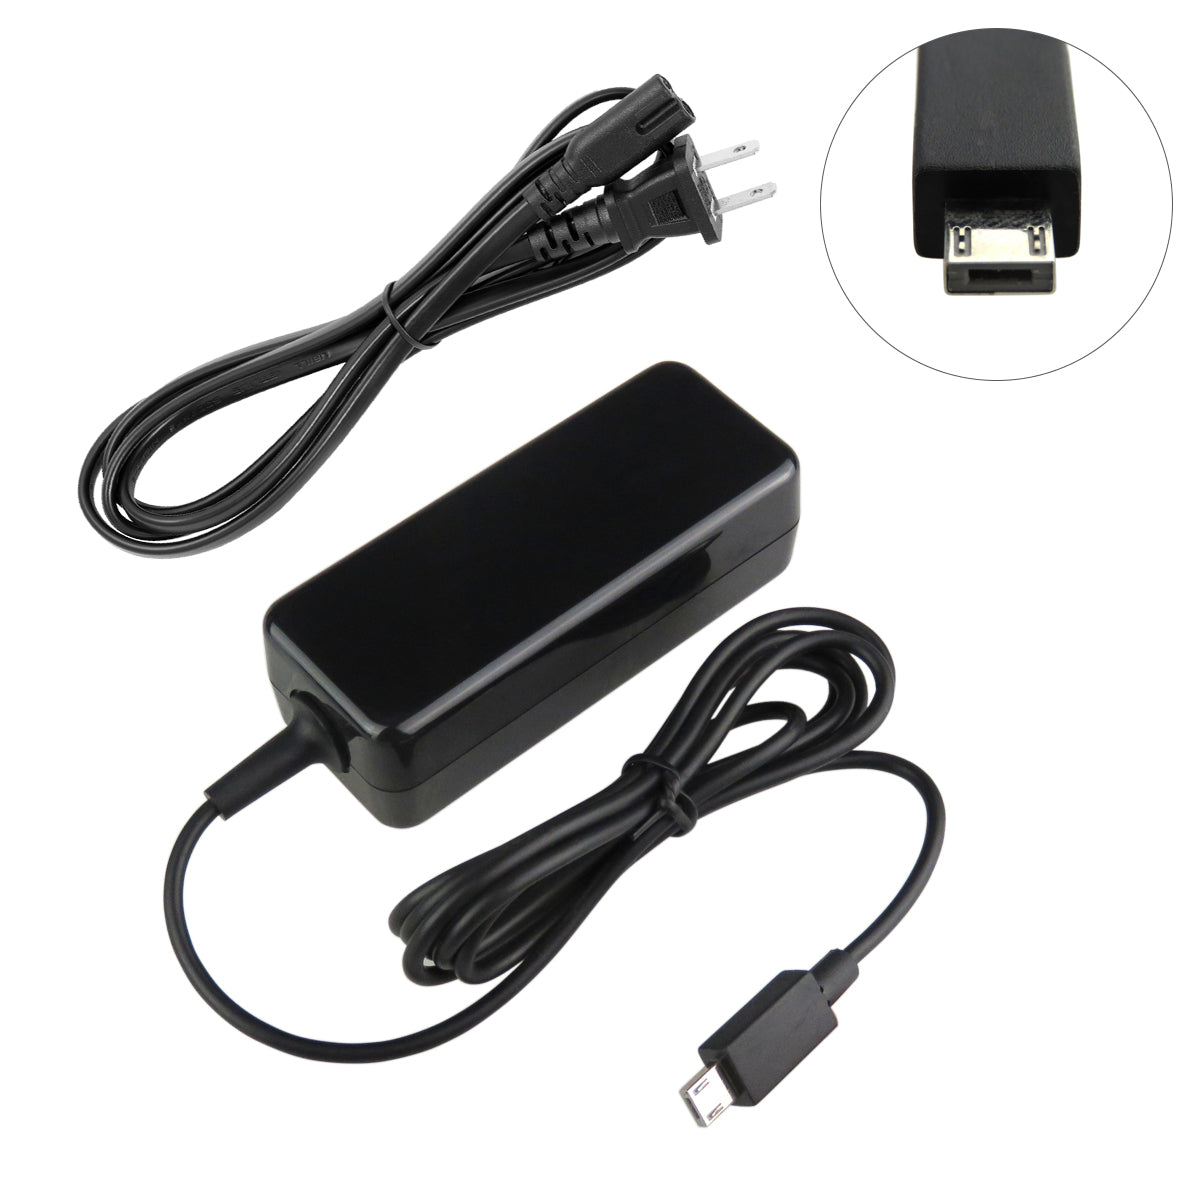 Charger for ASUS EeeBook F205TA-FD018BS Laptop.